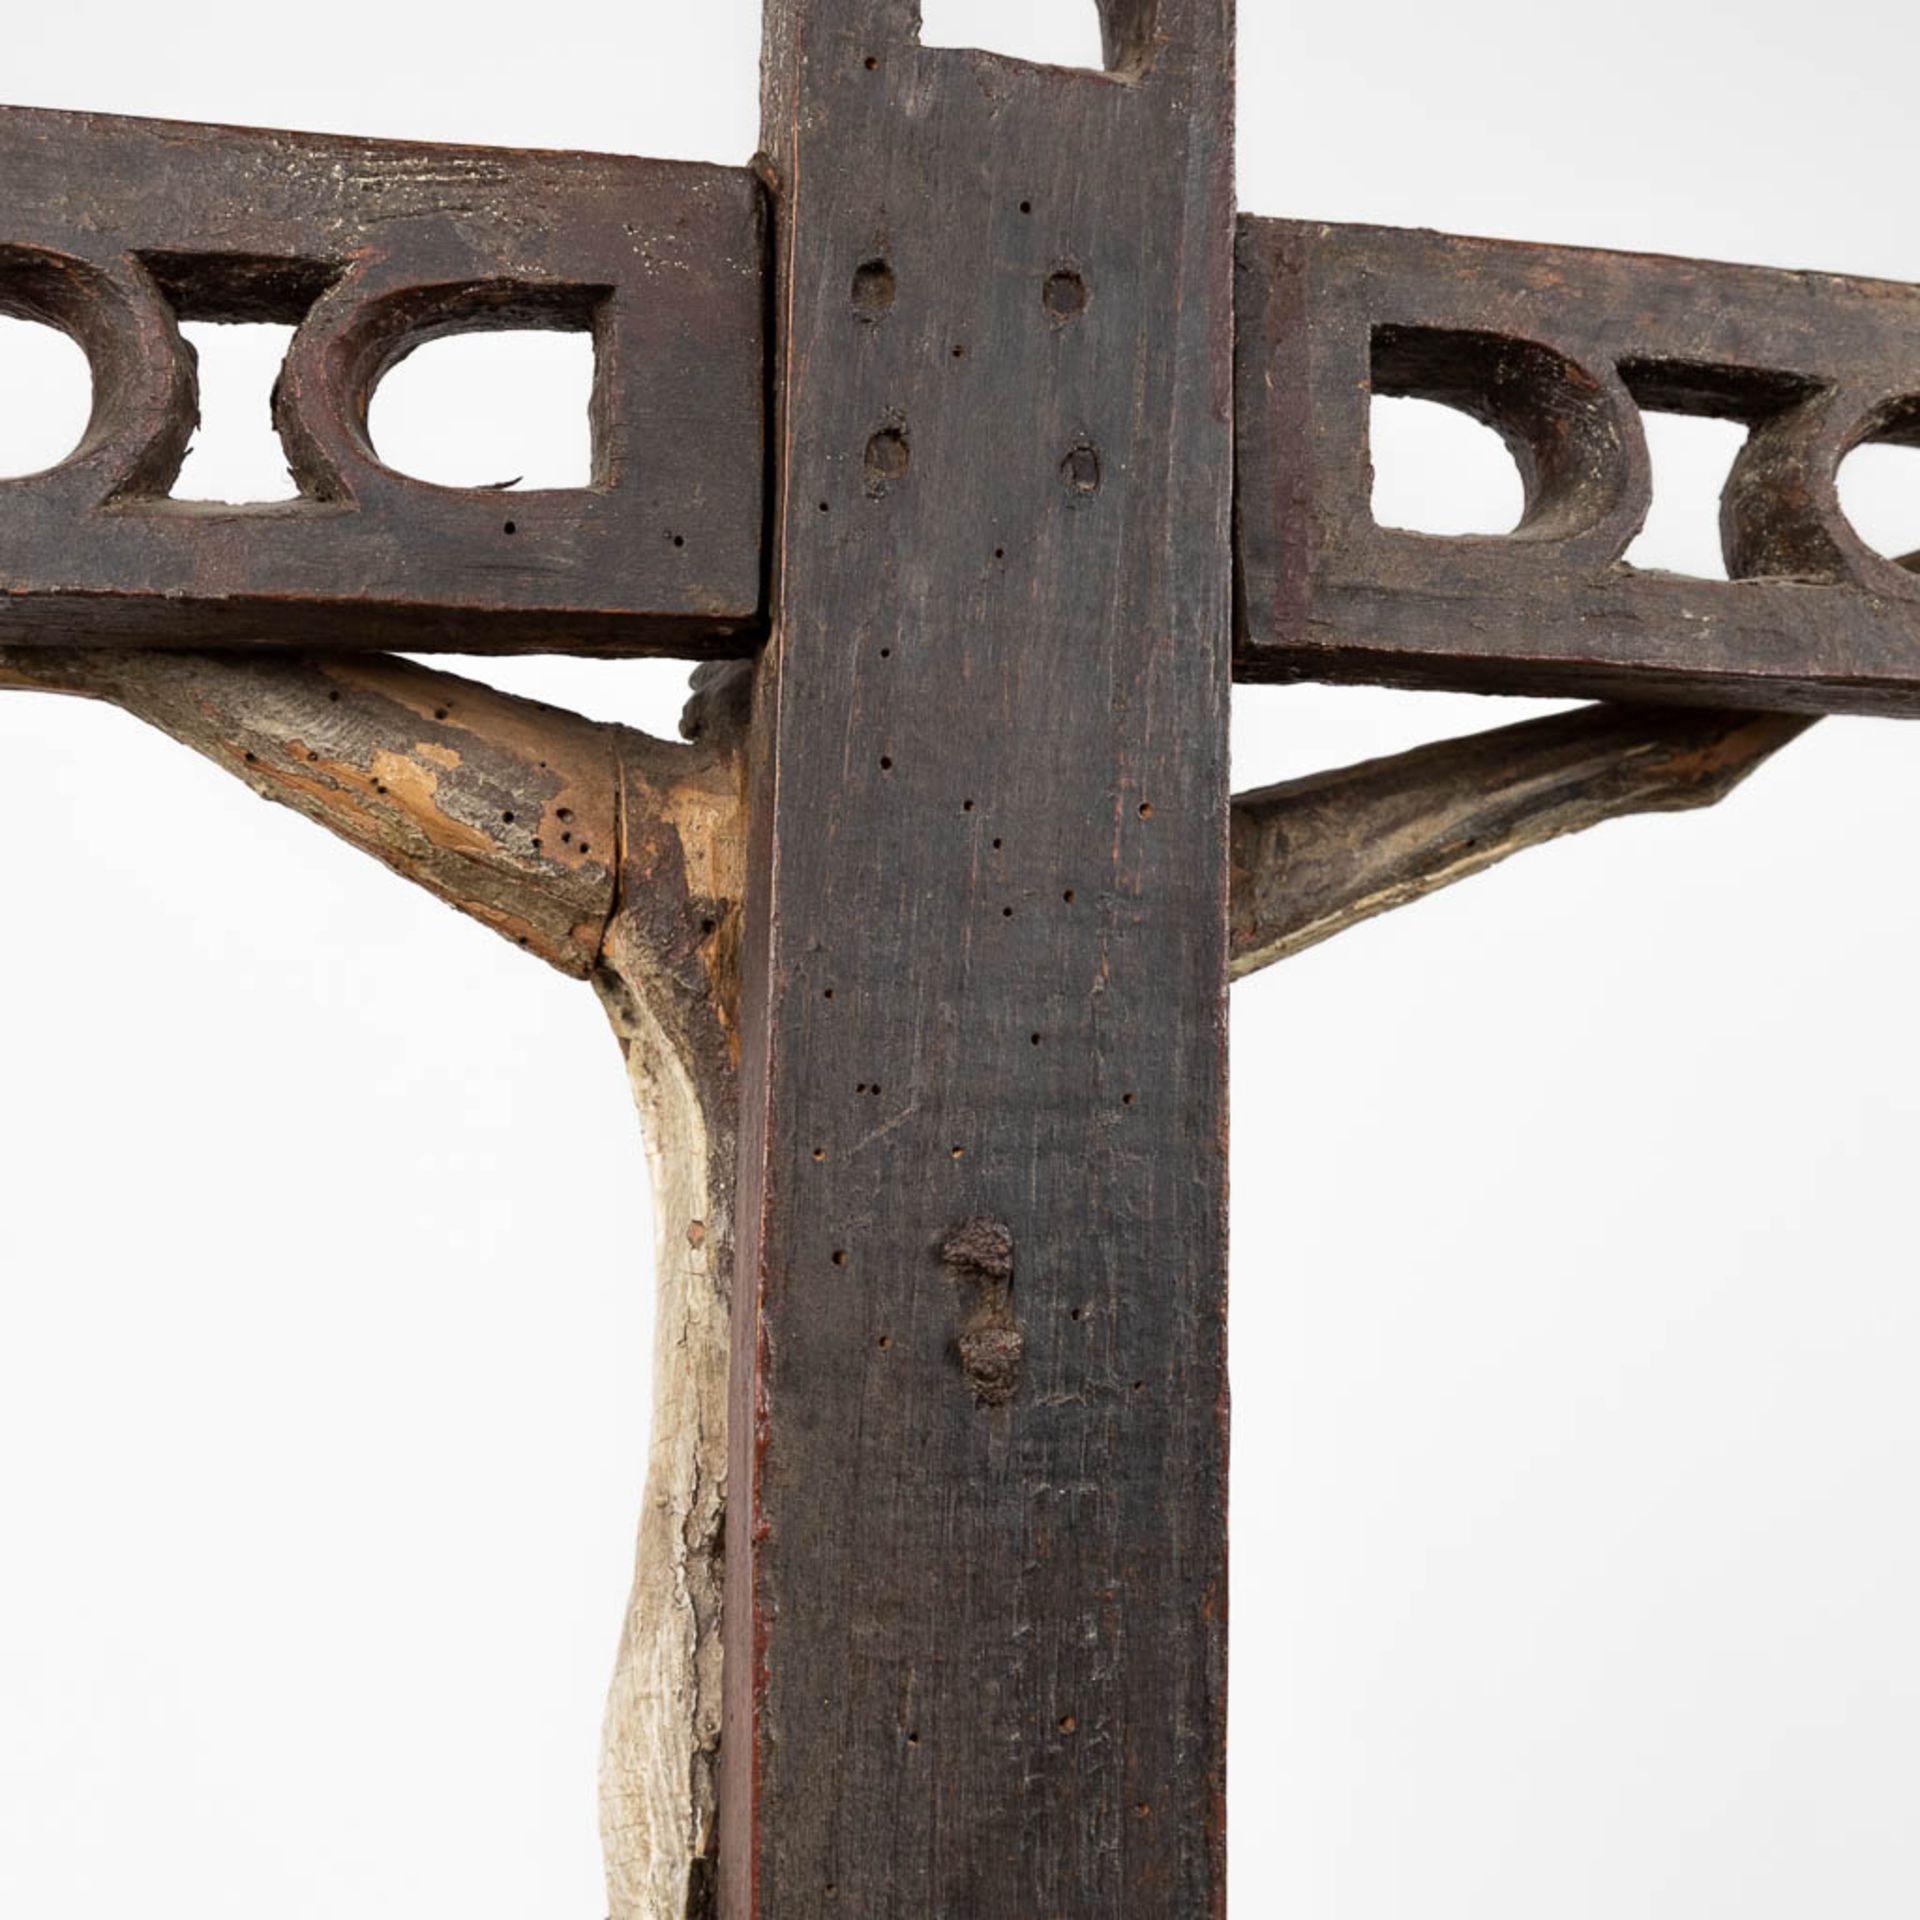 An antique wood-sculptured statue of Jesus on the cross, folk art. 18th C. (W:55 x H:112 cm) - Image 14 of 15